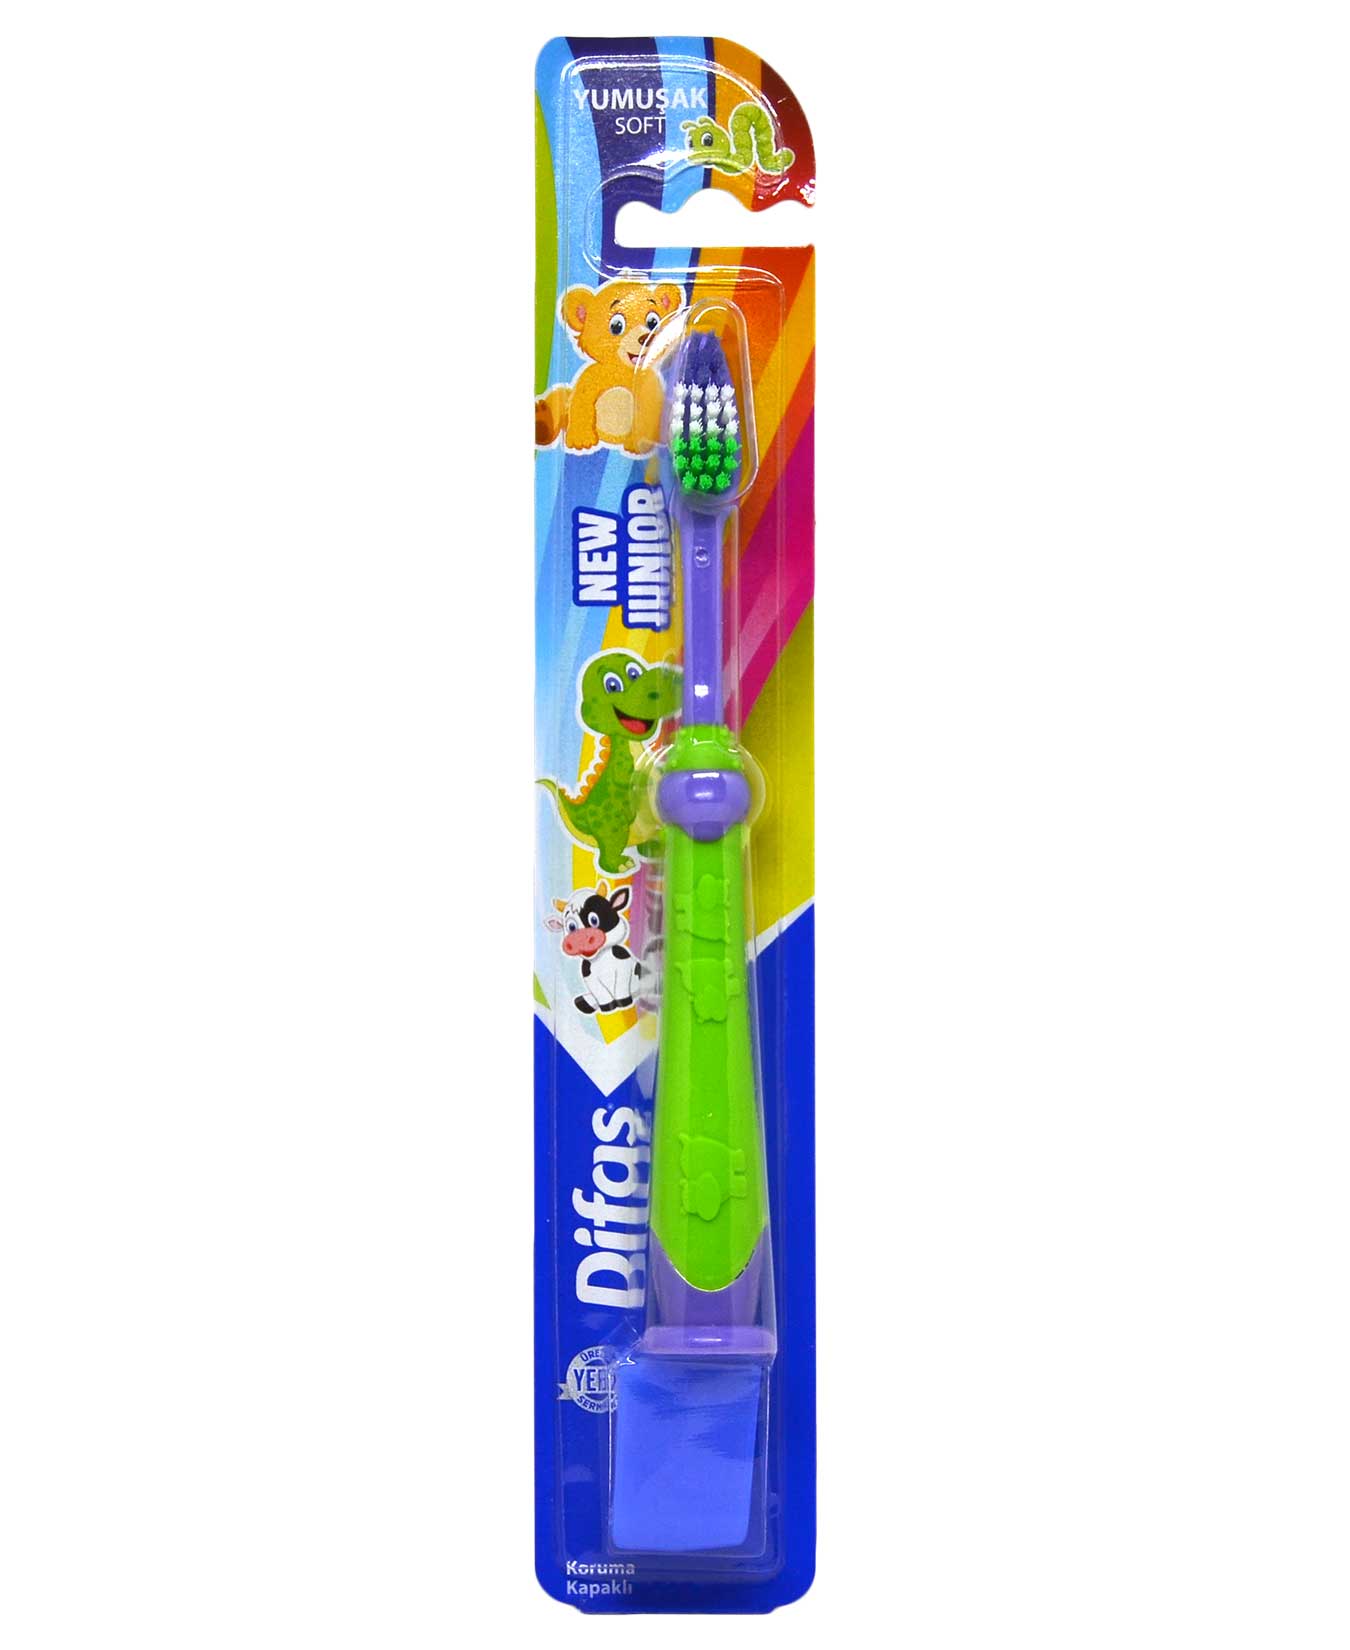 Toothbrush [New Junior] 1'S - Difas product available at family pharmacy online buy now at qatar doha